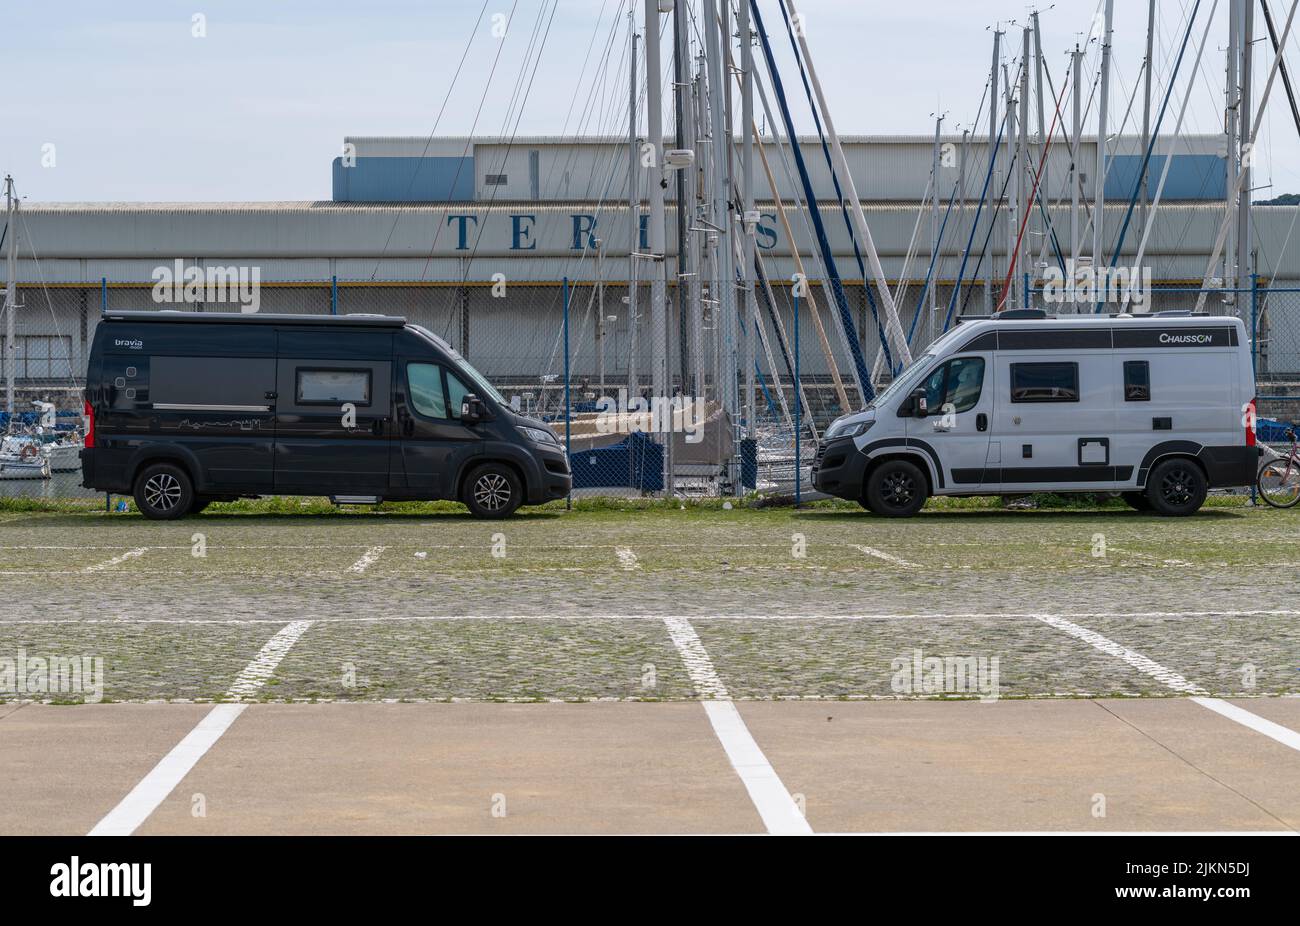 A side view of two - black and white mini buses parked in front of an industrial building Stock Photo